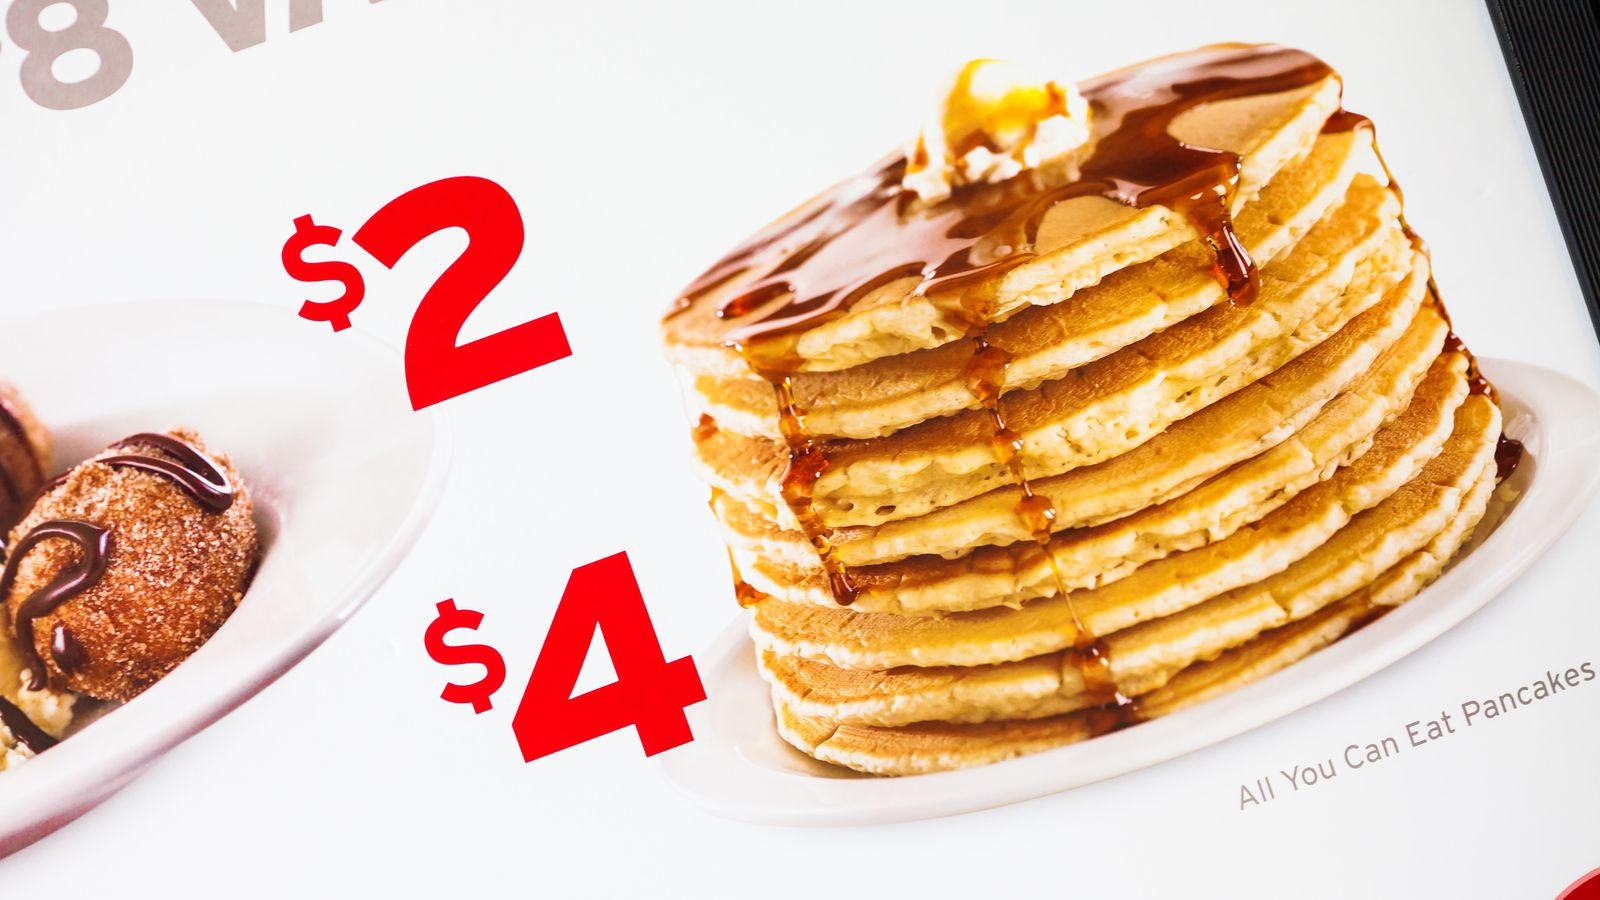 All You Can Eat Pancakes
 Denny s Diner Flies Into All You Can Eat Pancake Rage Eater